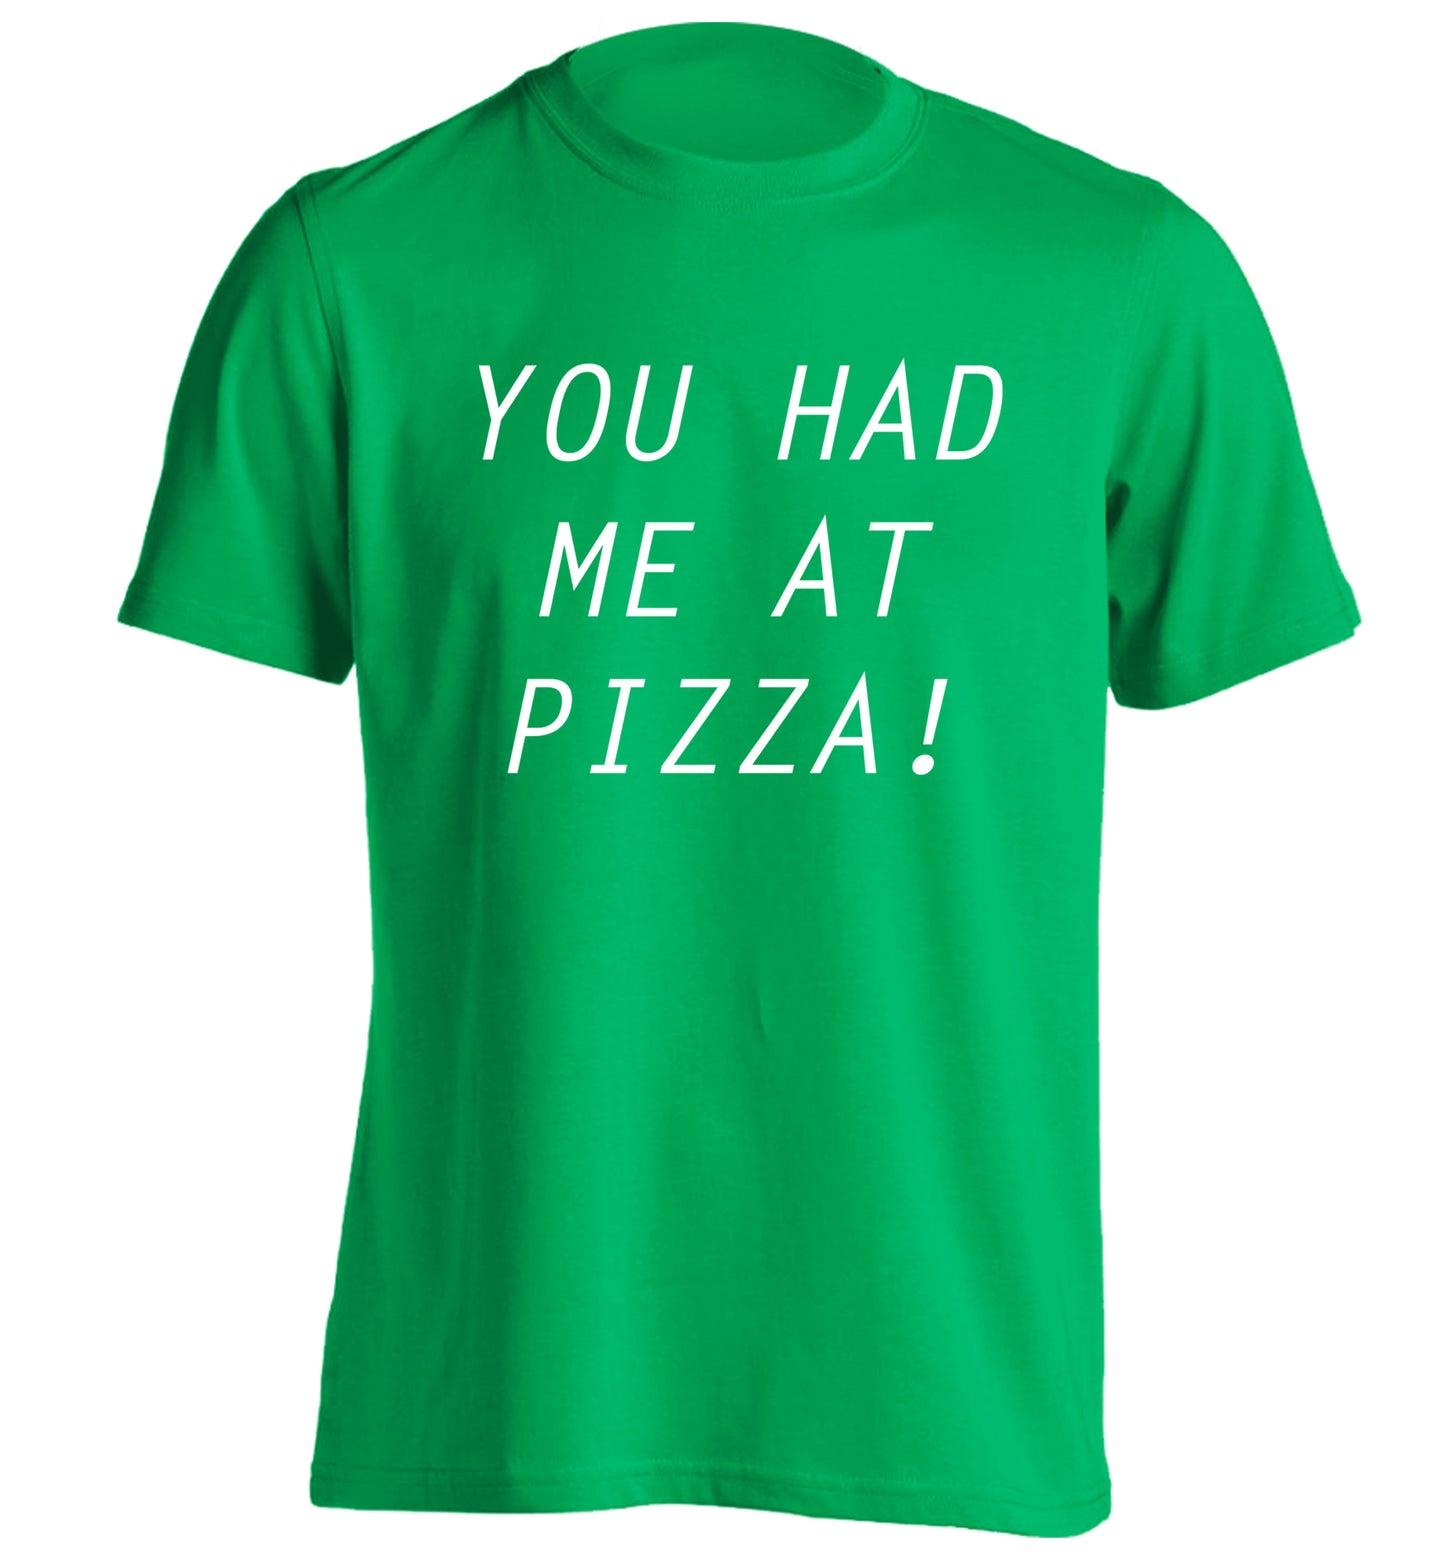 You had me at pizza adults unisex green Tshirt 2XL